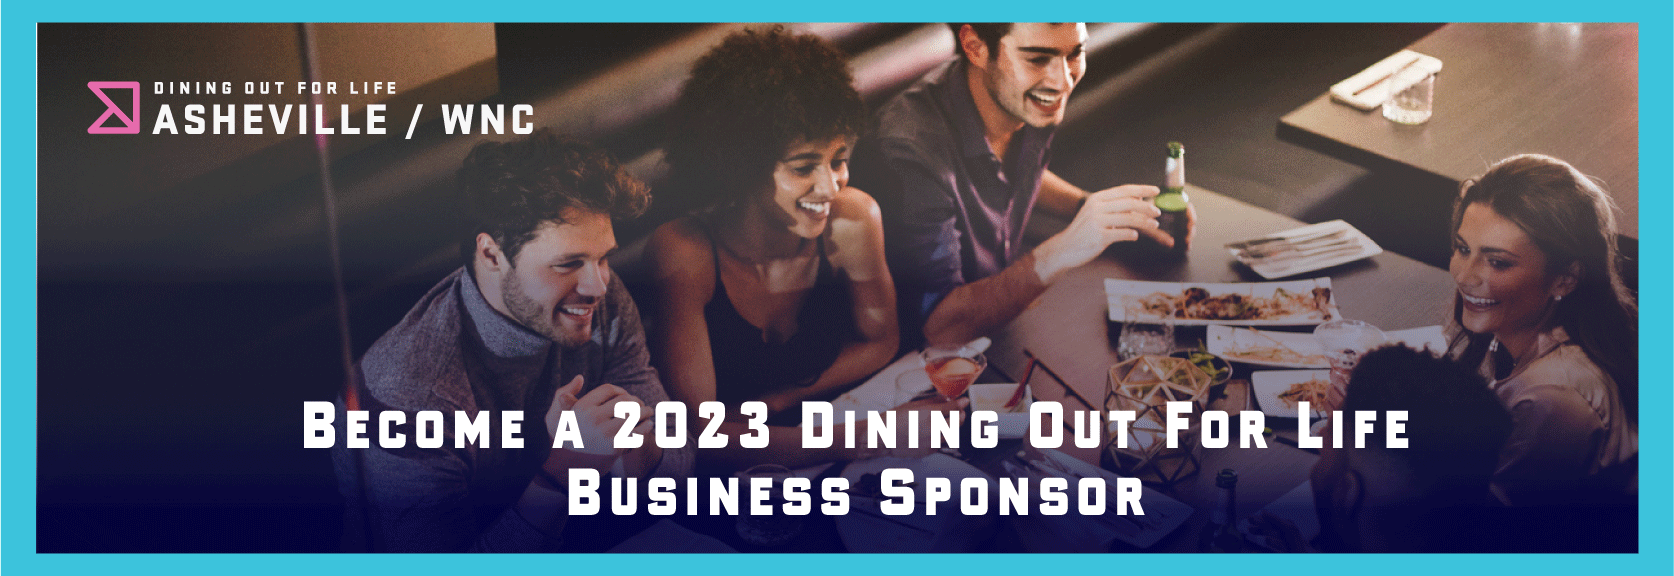 Asheville 2023 Dining Out For Life Business Sponsorshipbanner